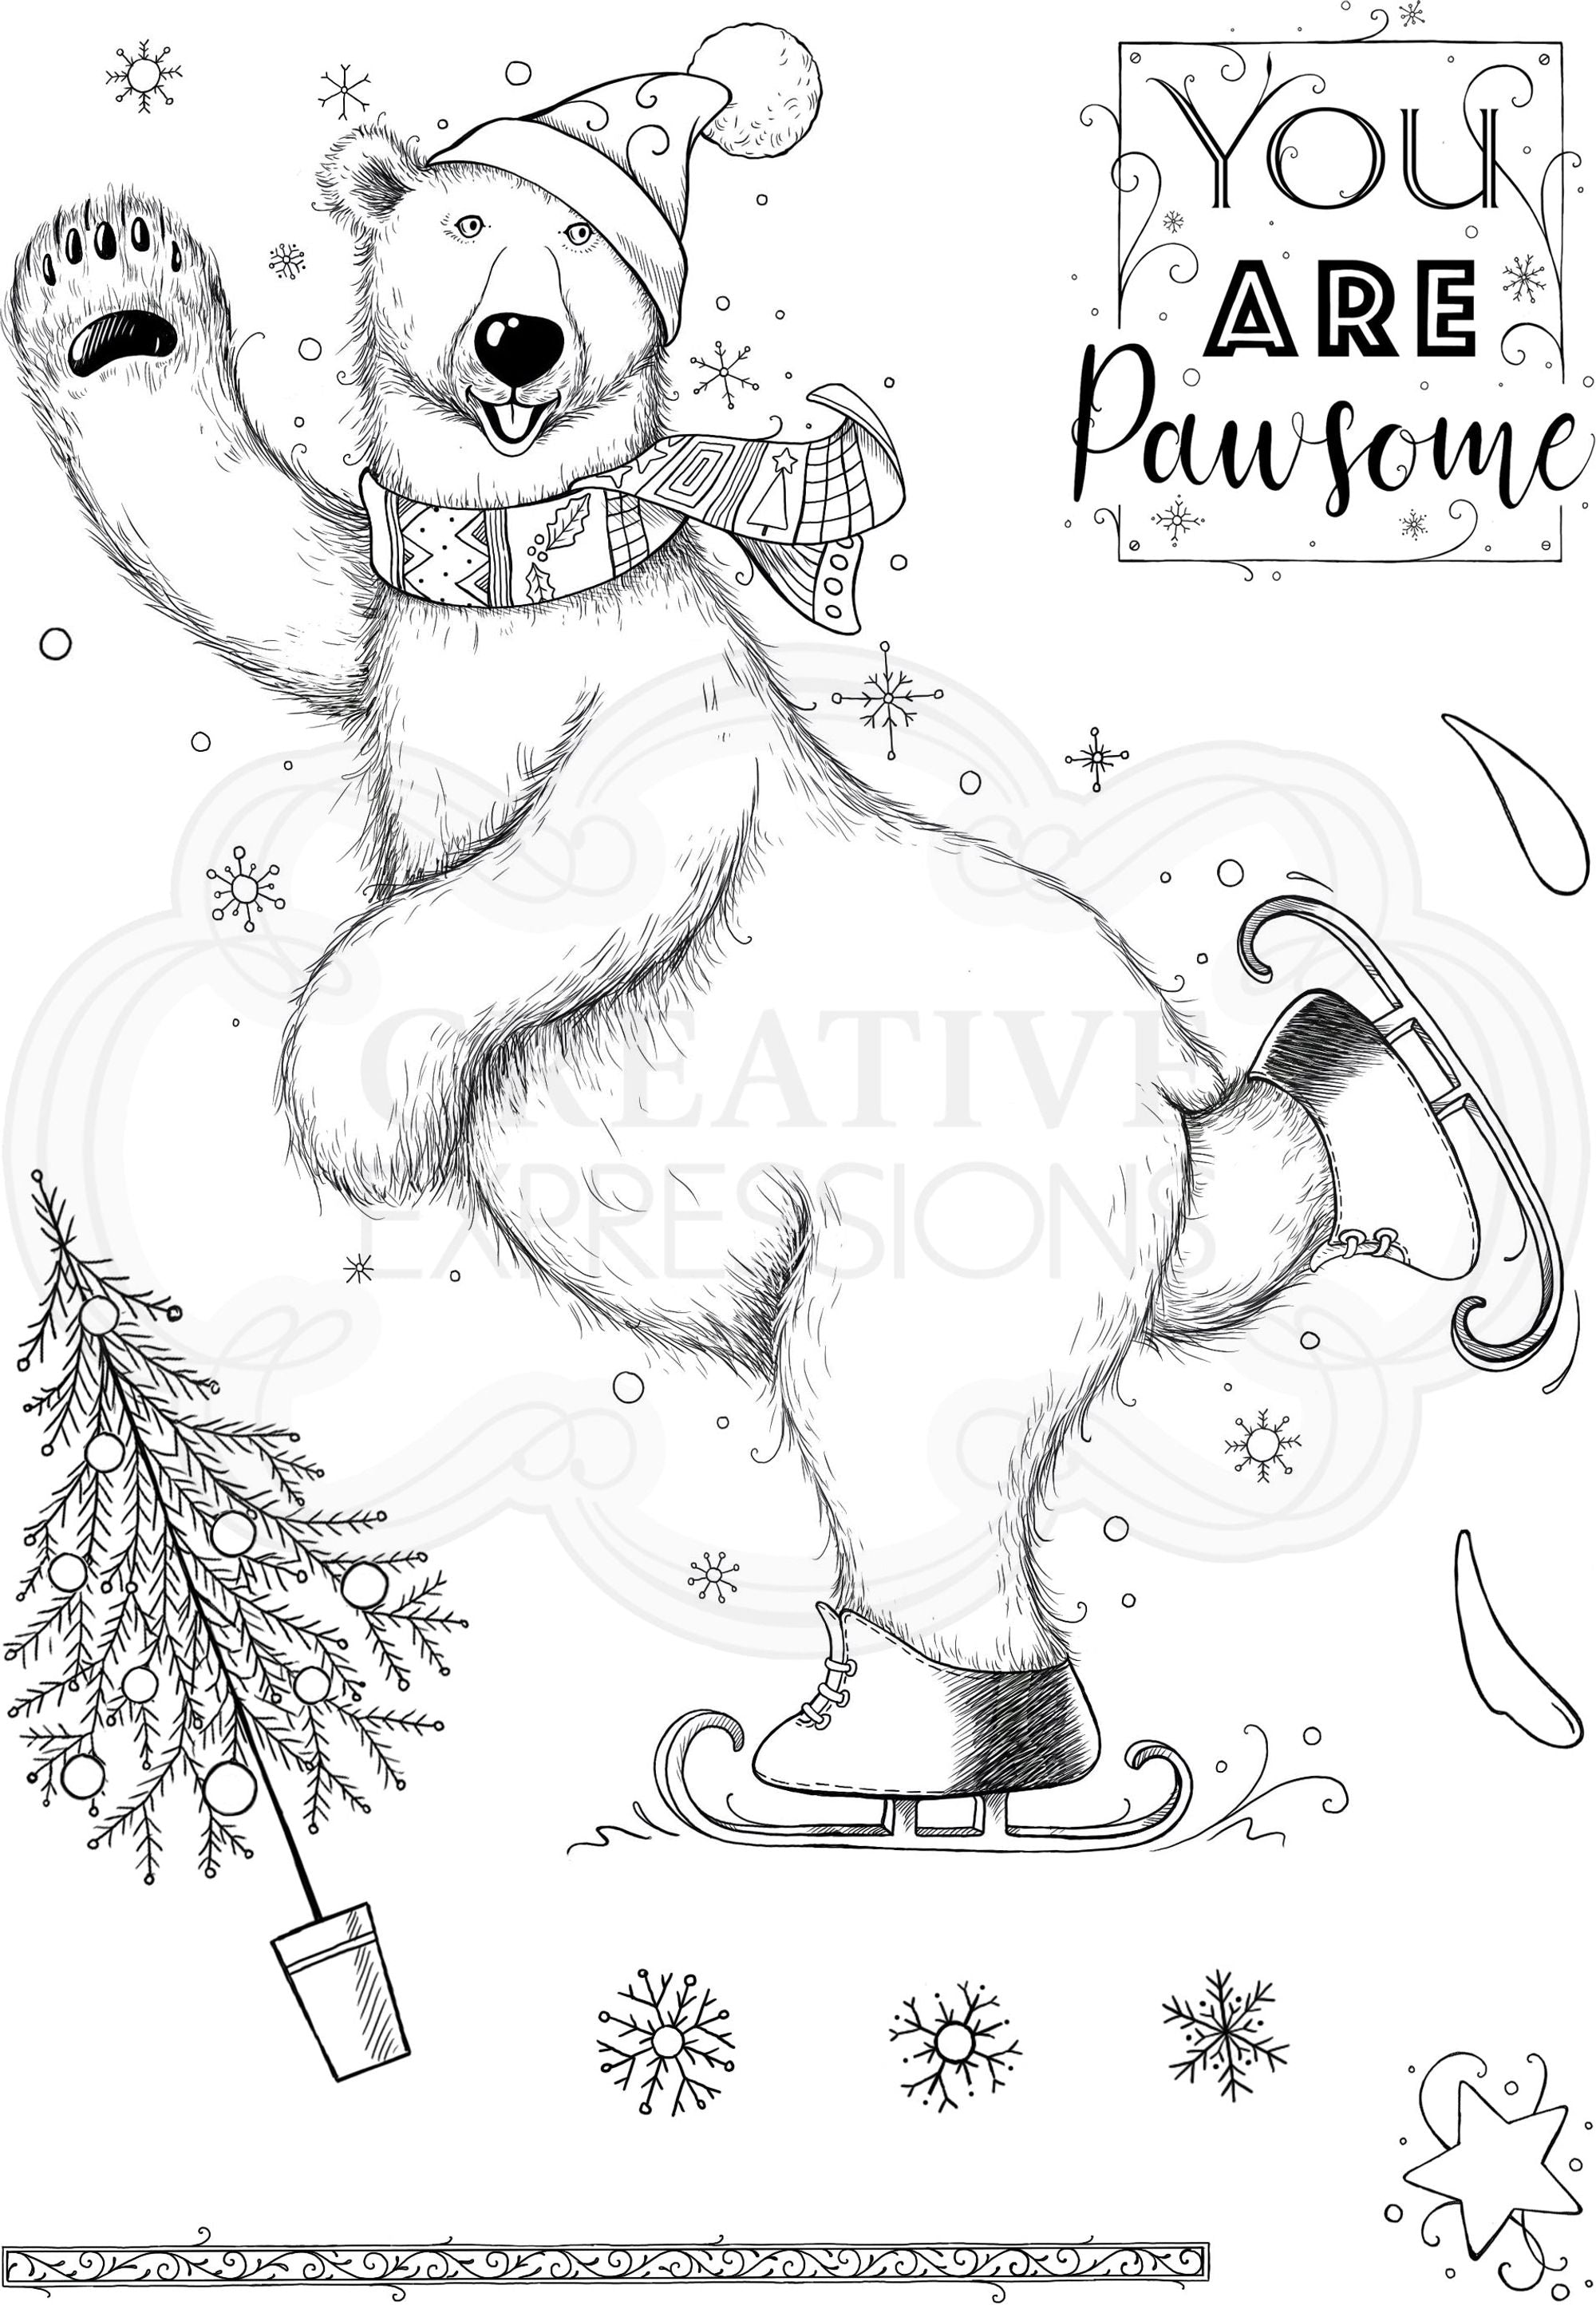 Pink Ink Designs Beary Christmas A5 Clear Stamp